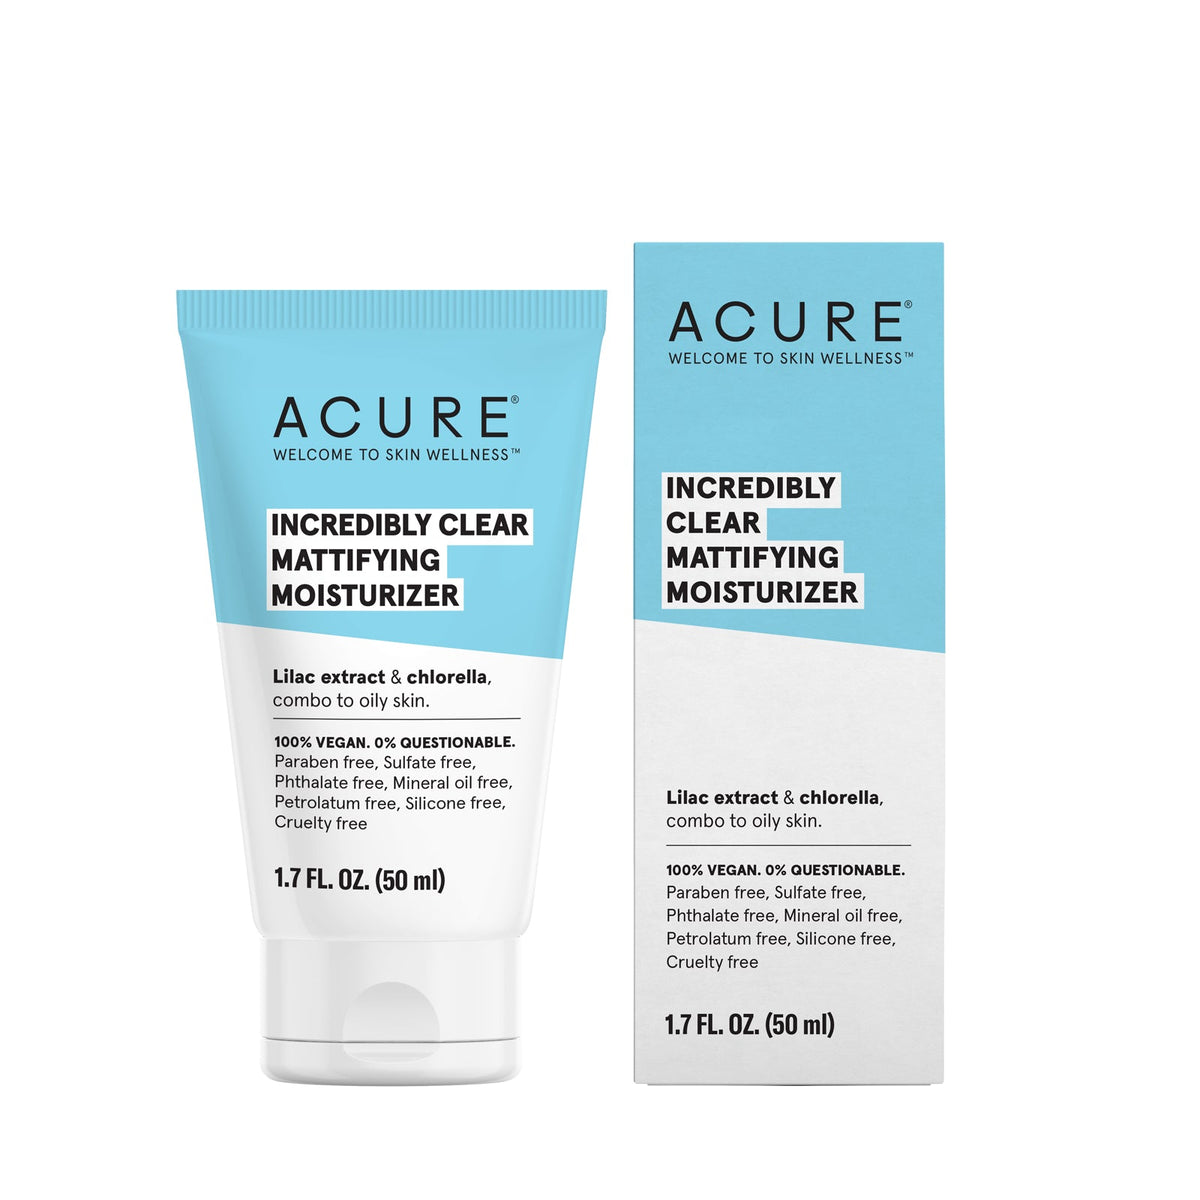 ACURE - Incredibly Clear Mattifying Moisturizer - by Acure |ProCare Outlet|